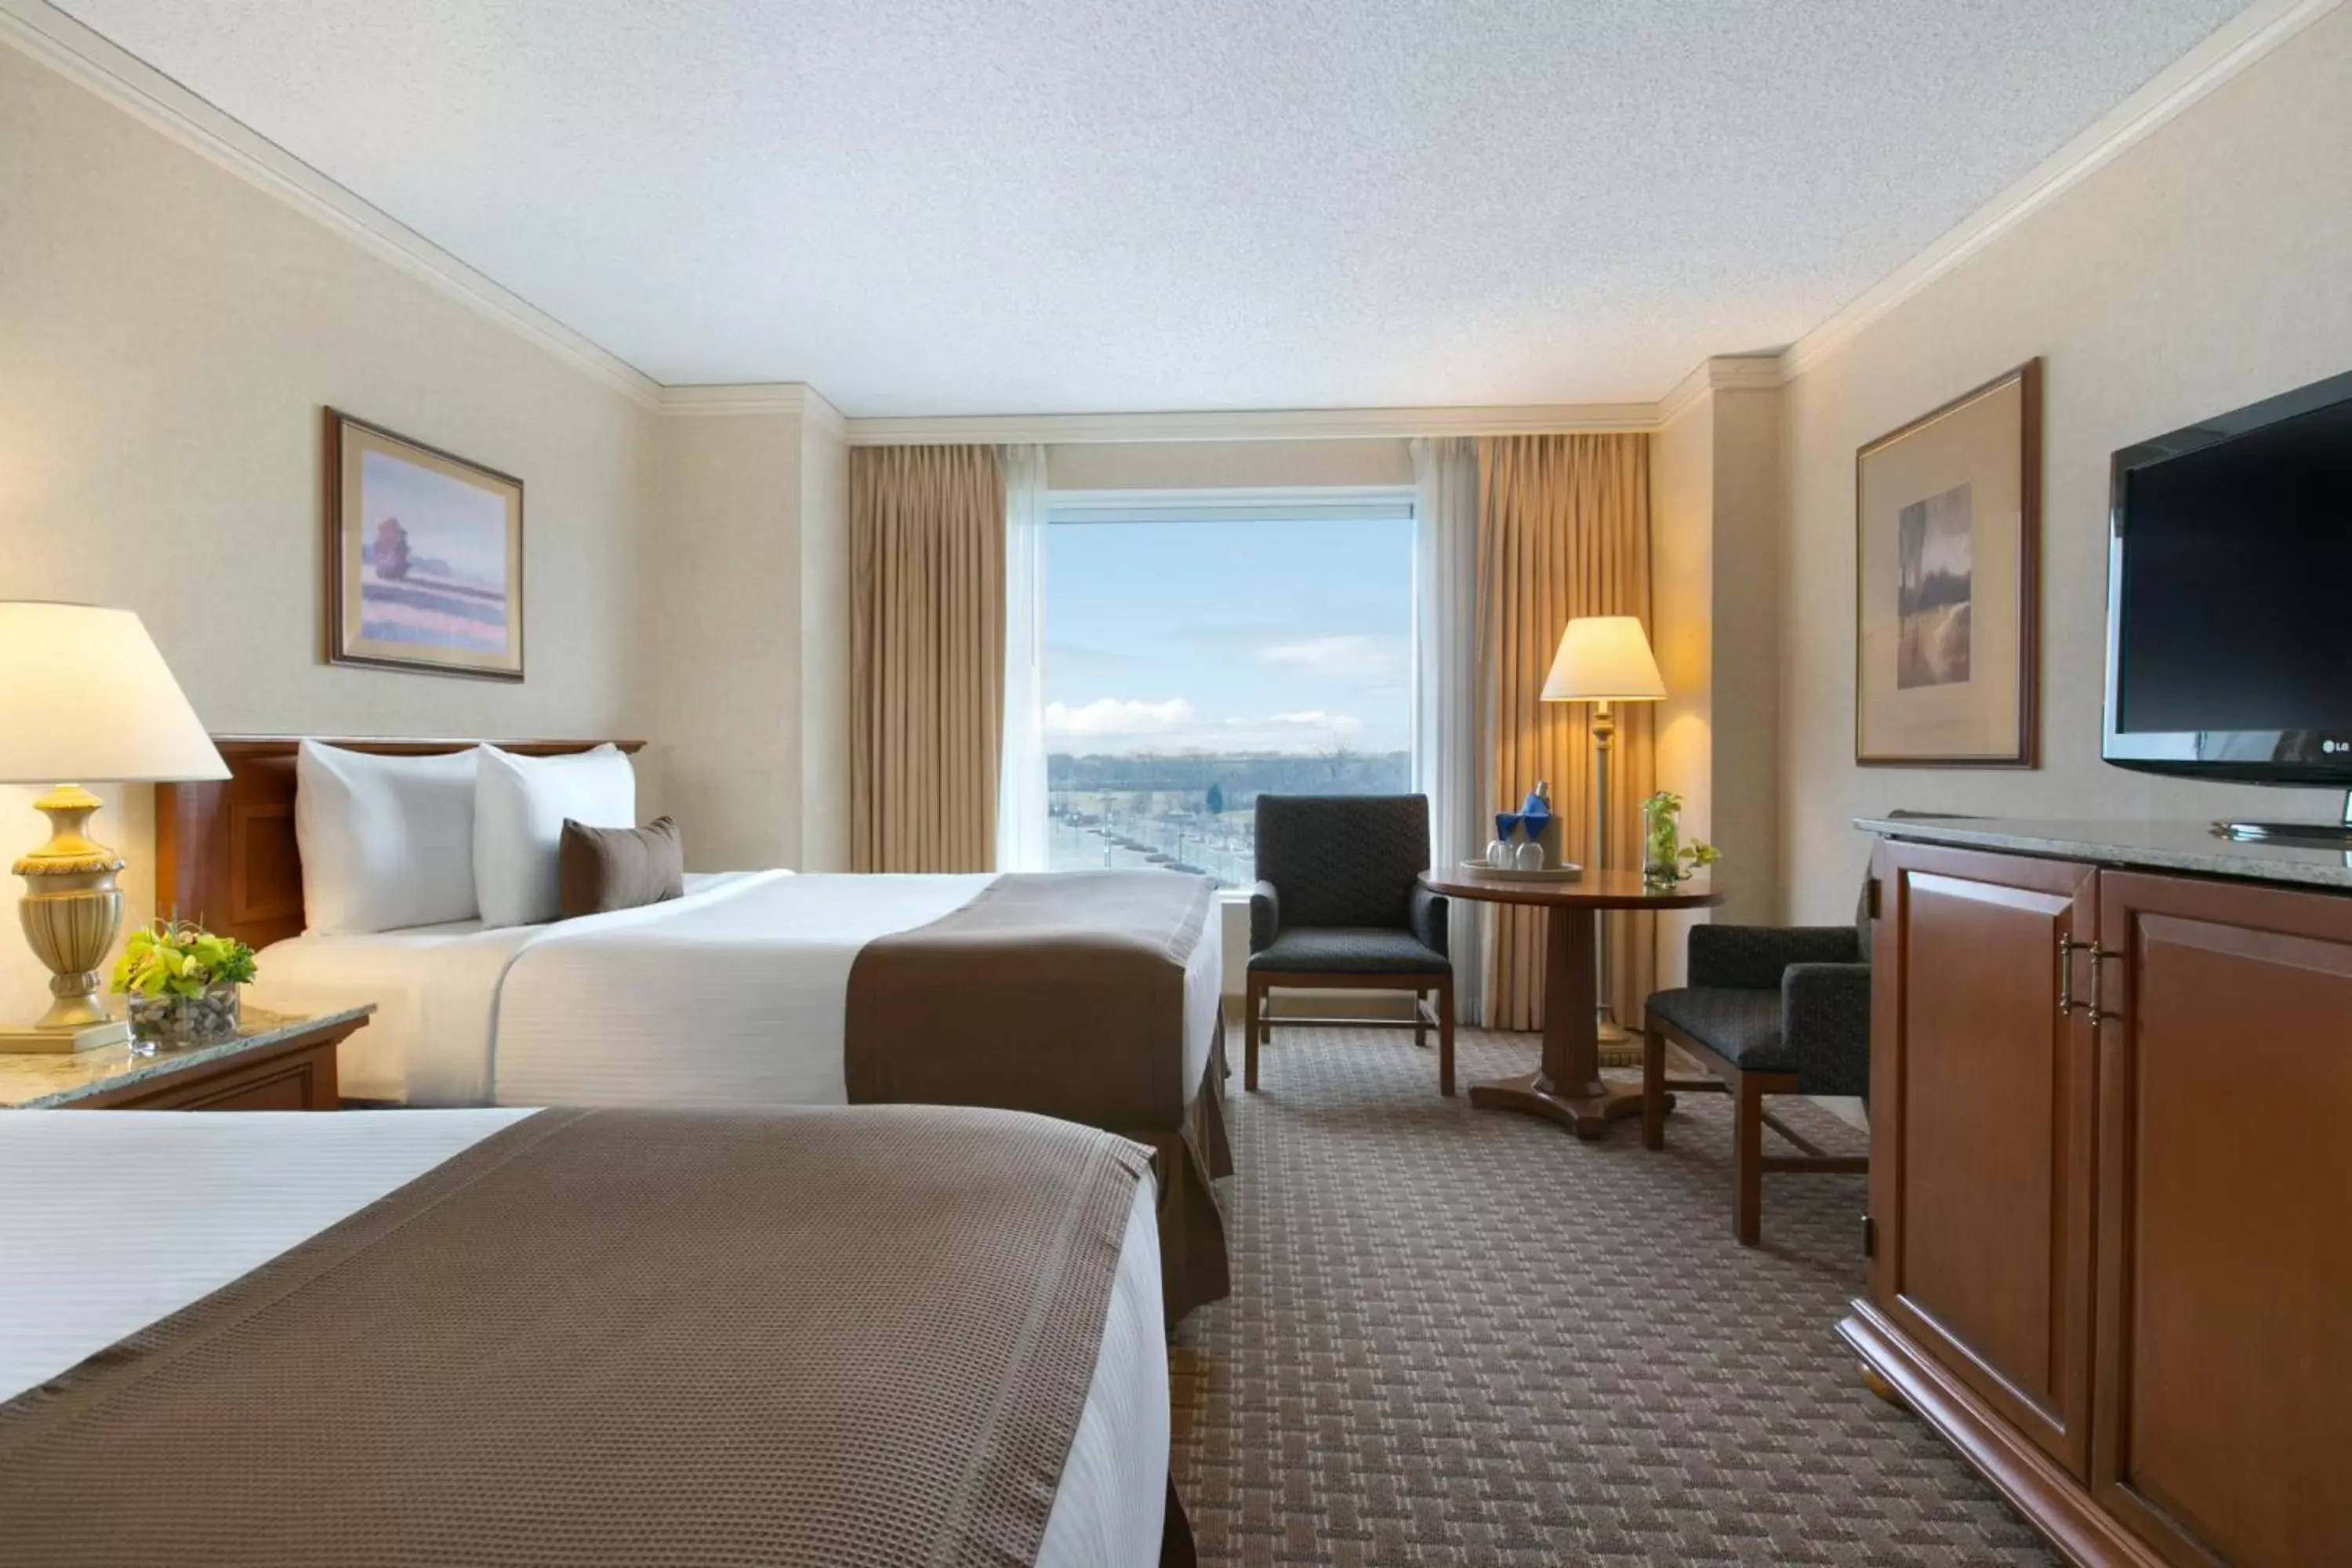 Deluxe Queen Room with Two Queen Beds in Harrah's Casino & Hotel Council Bluffs